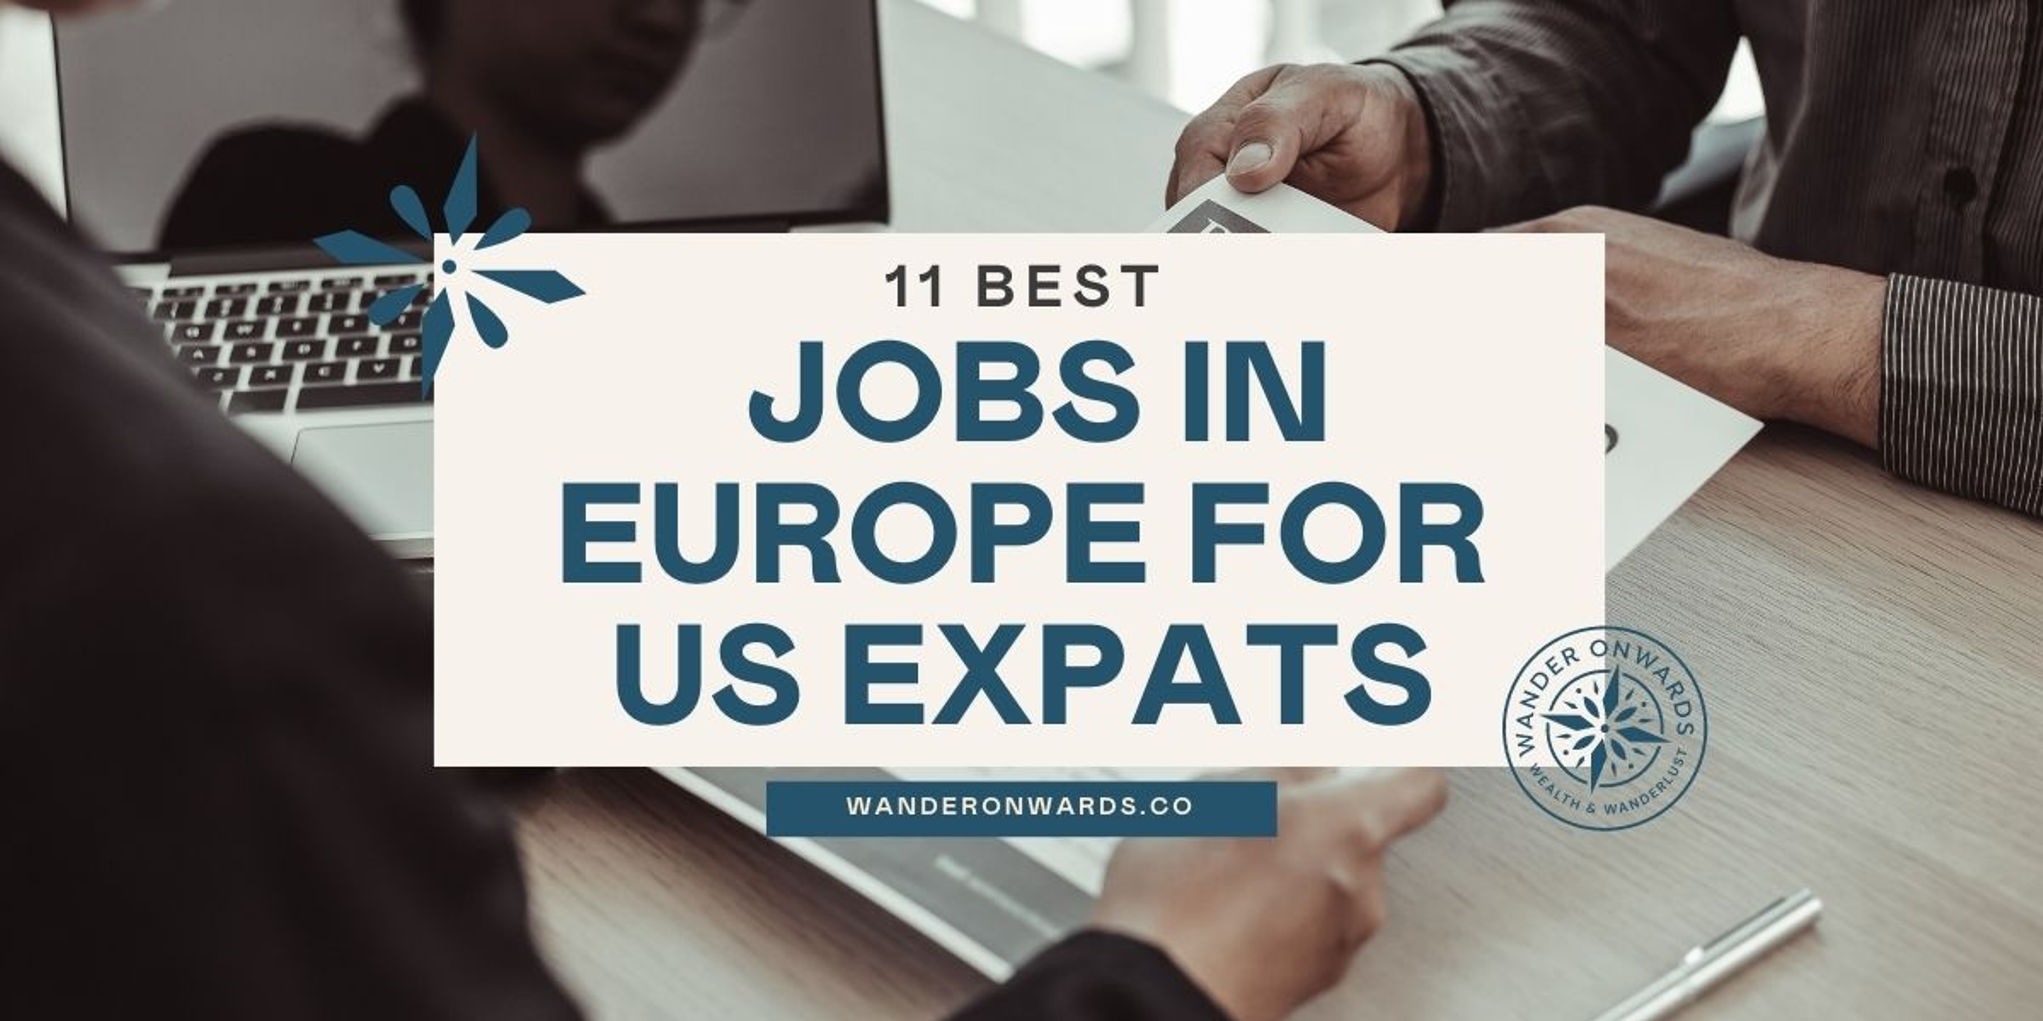 11 Best Jobs in Europe for Expats Wander Onwards